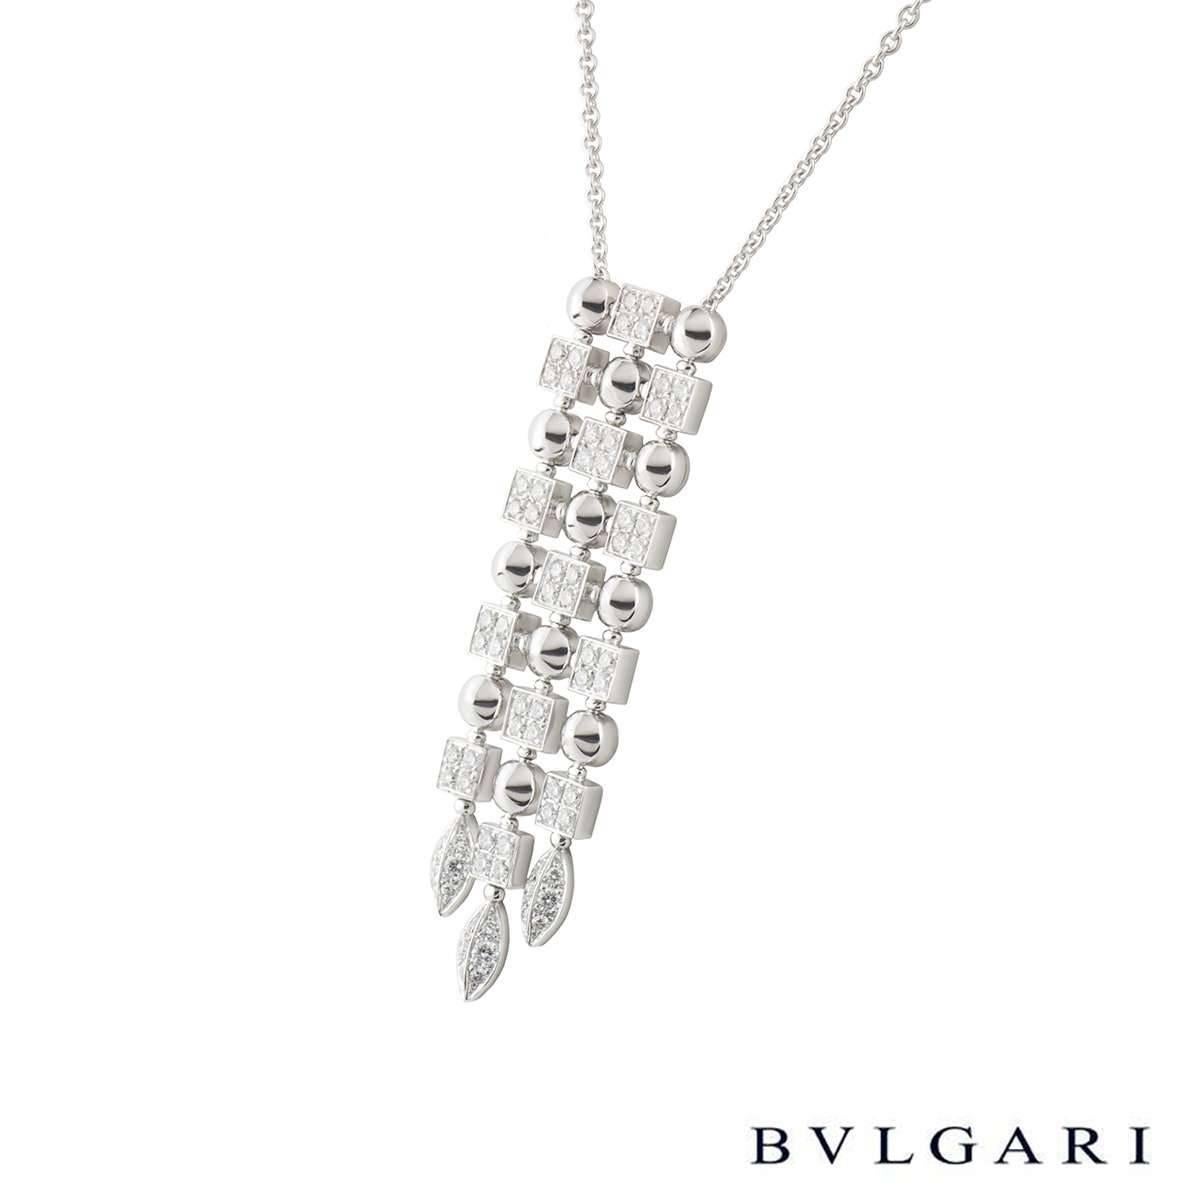 A stunning diamond necklace from the Lucea collection by Bvlgari. The necklace is composed of 13 square links each set with 4 round brilliant cut diamonds, interlinking between each diamond set square is an 18k white gold spherical link. The links